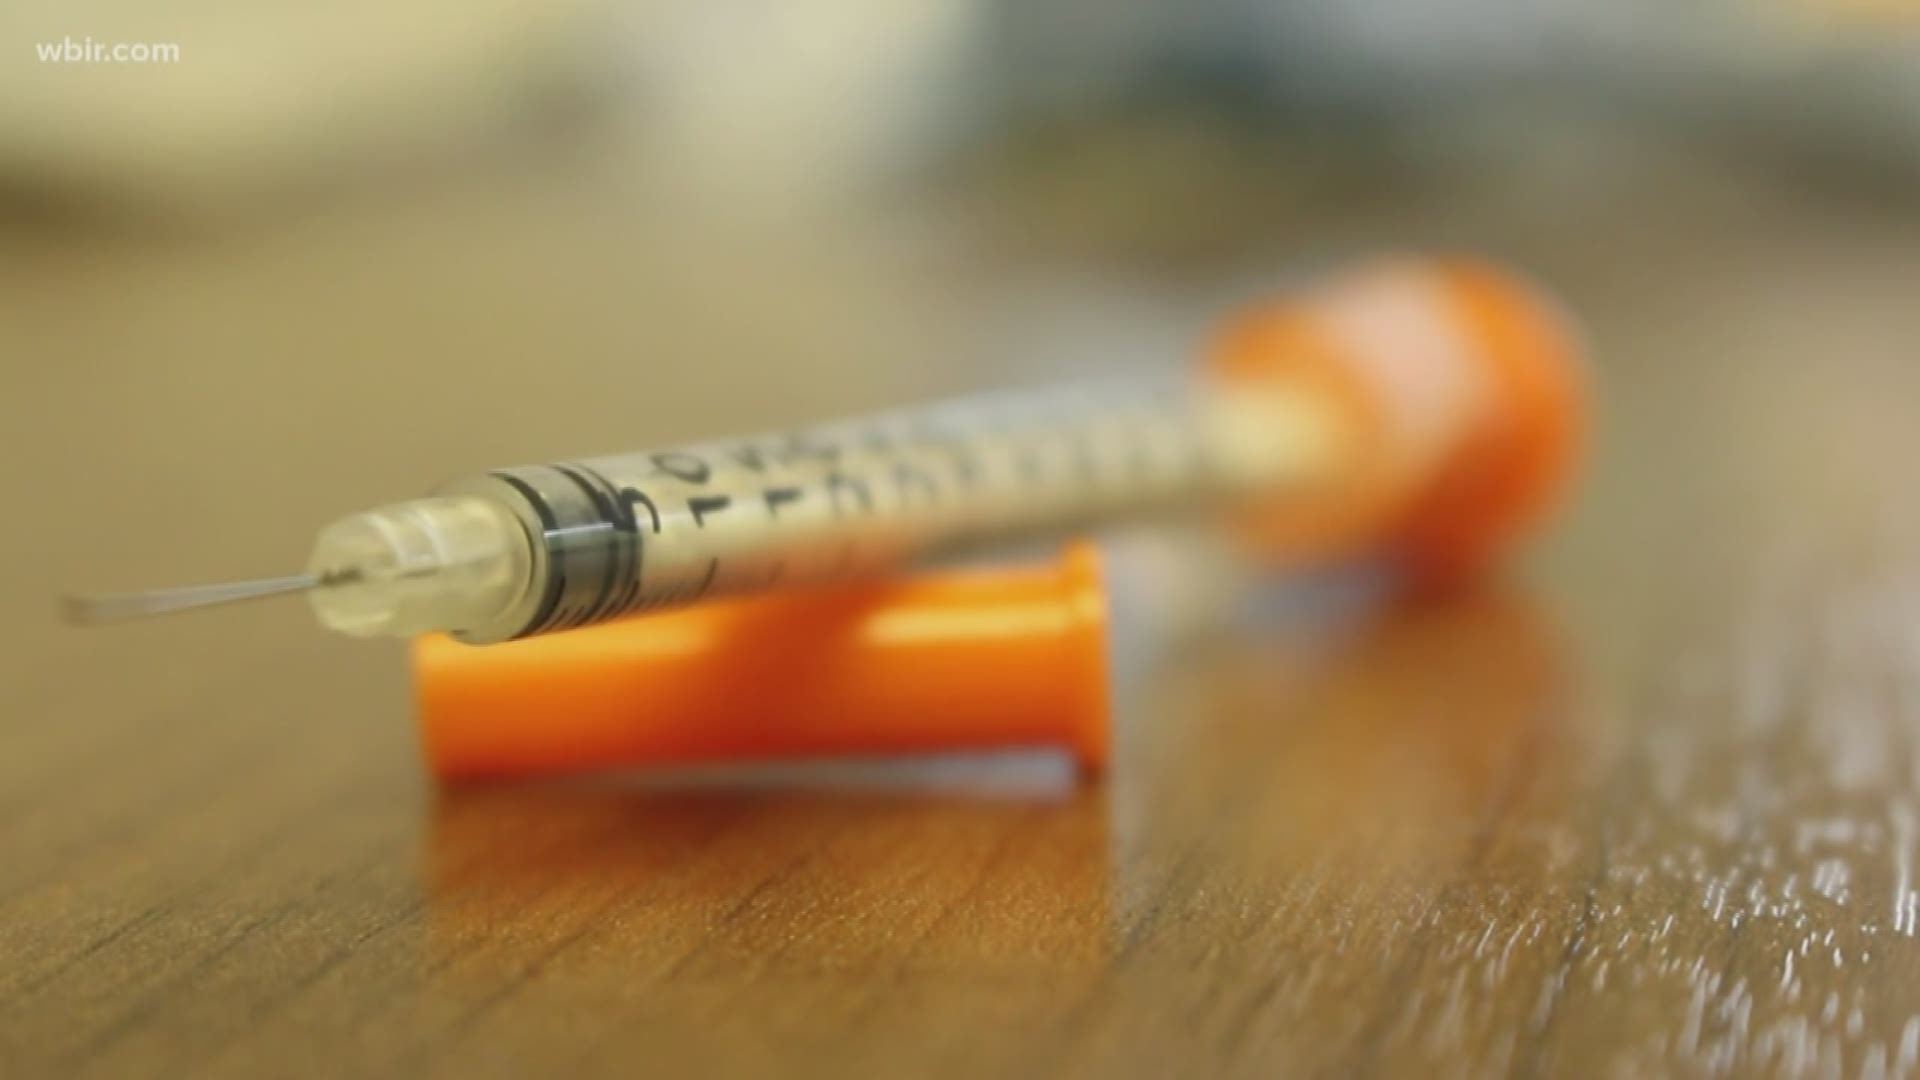 In the first 6 months of operation, more than 600 people in Knoxville received free, clean syringes they can use to inject drugs. The program aims to reduce the spread of disease for drug users.